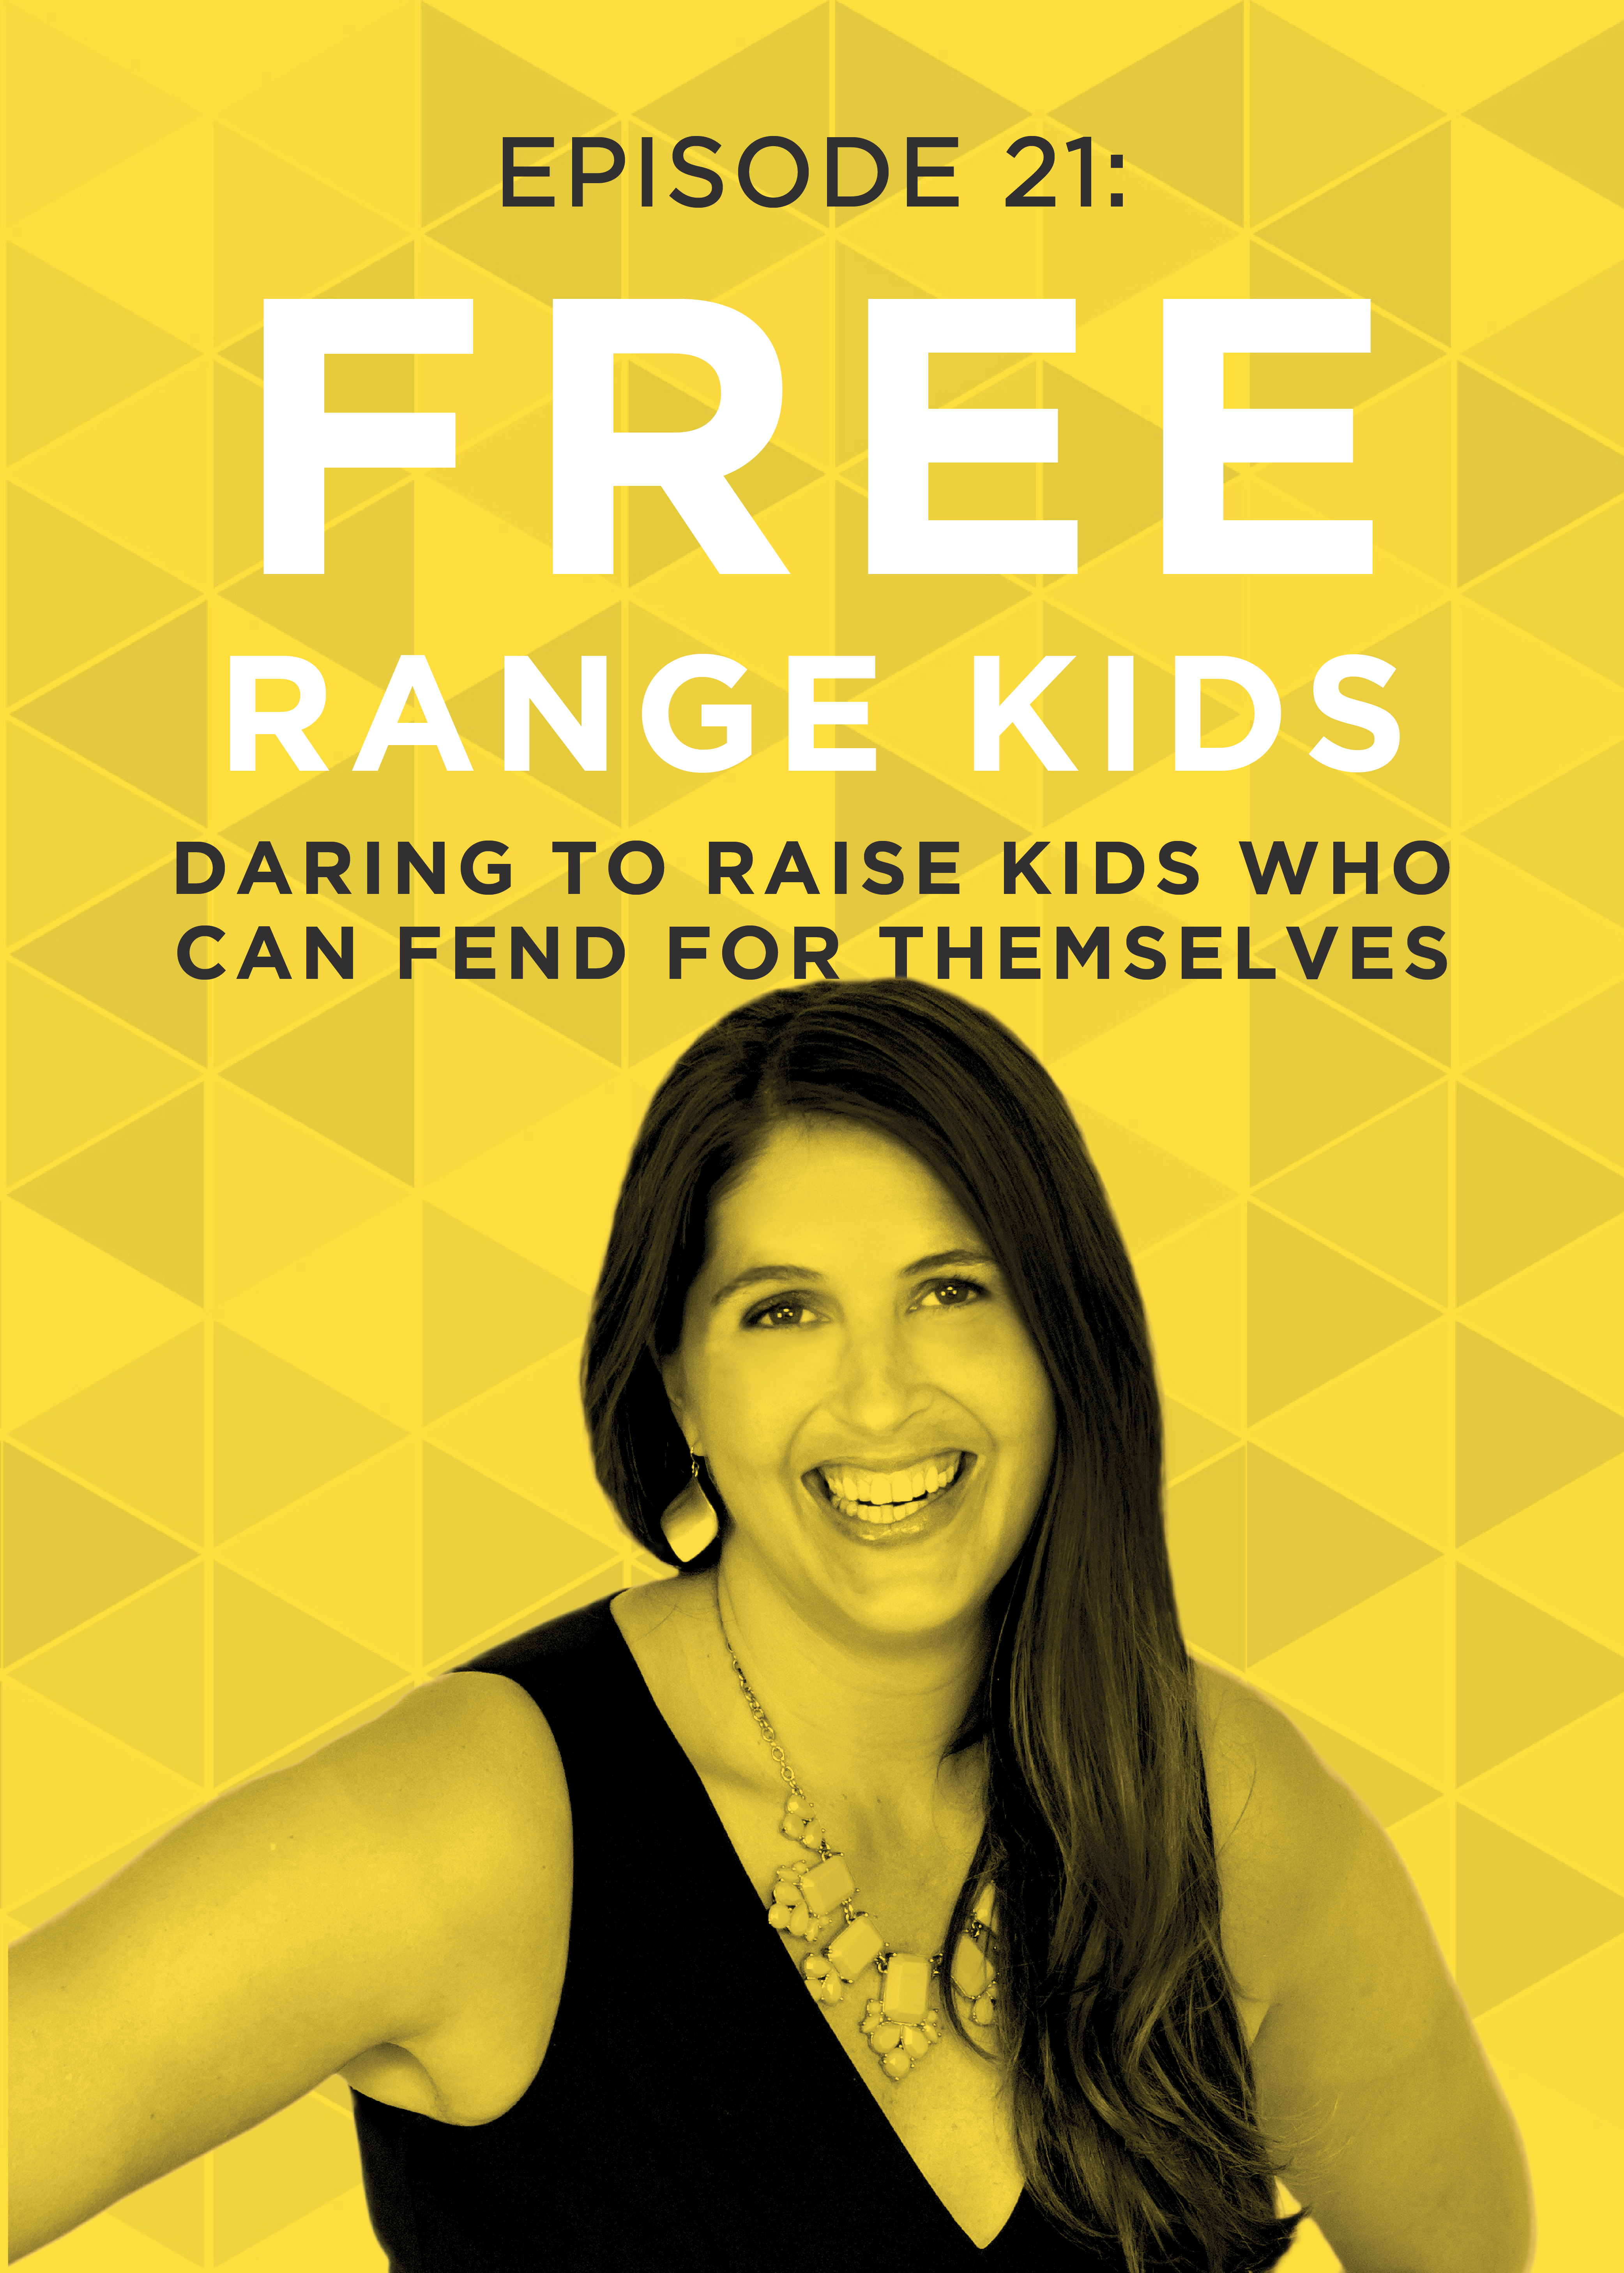 EP 21: Daring to Raise Kids Who Can Fend for Themselves